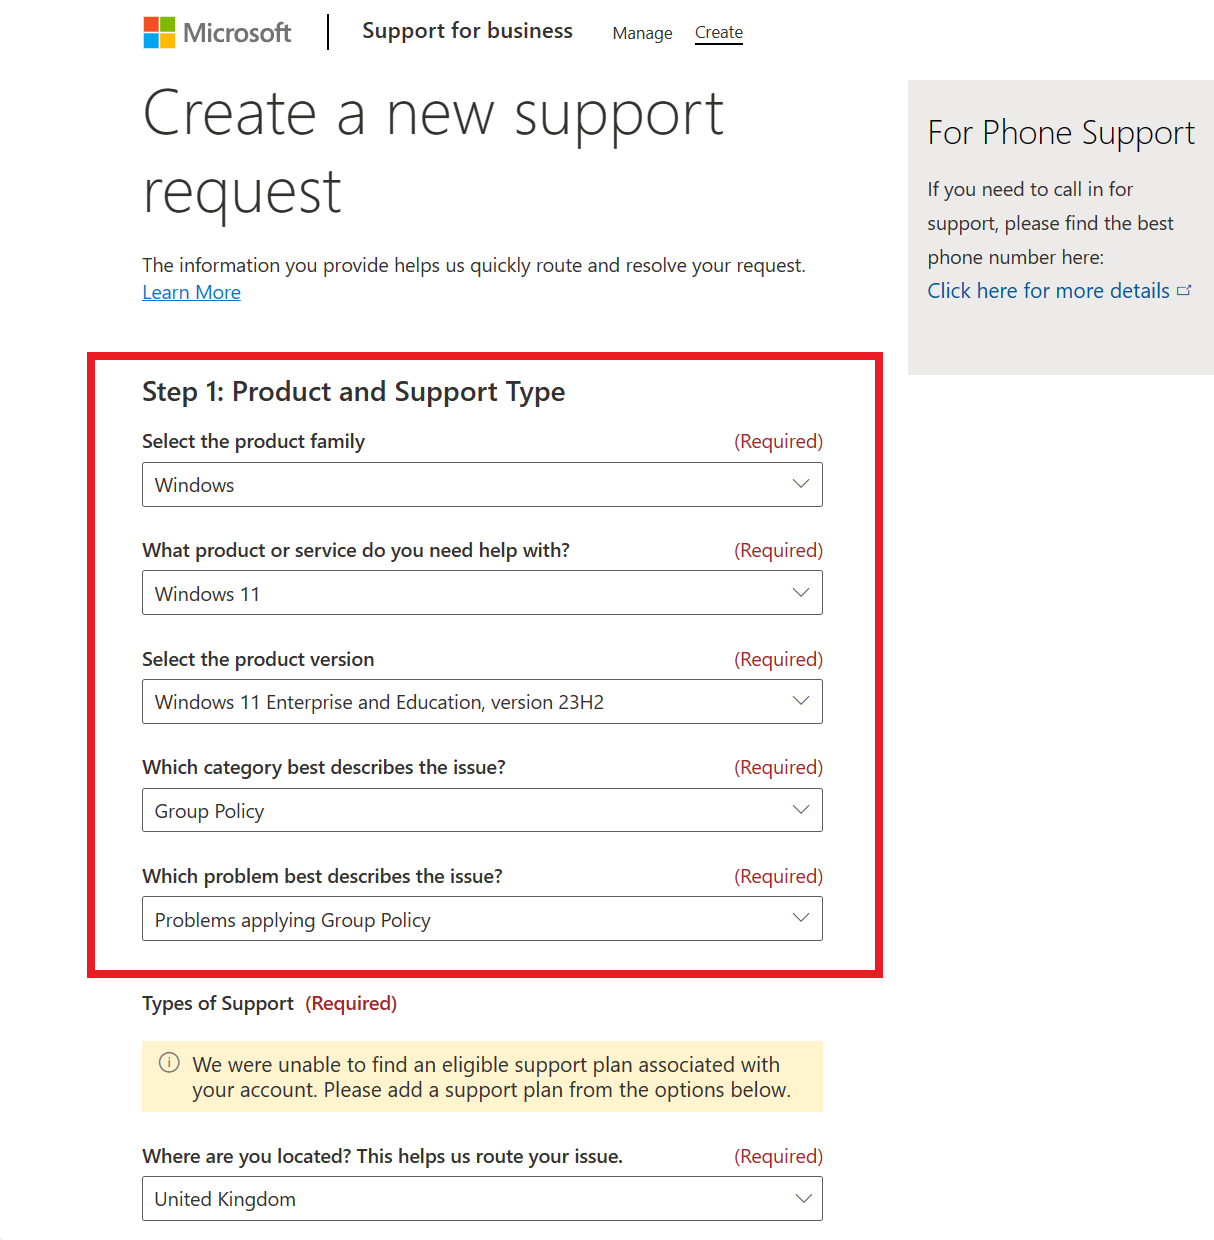 Screenshot of the Create a new support request page, with Windows 11 selected. In this example, there are no types of support available.